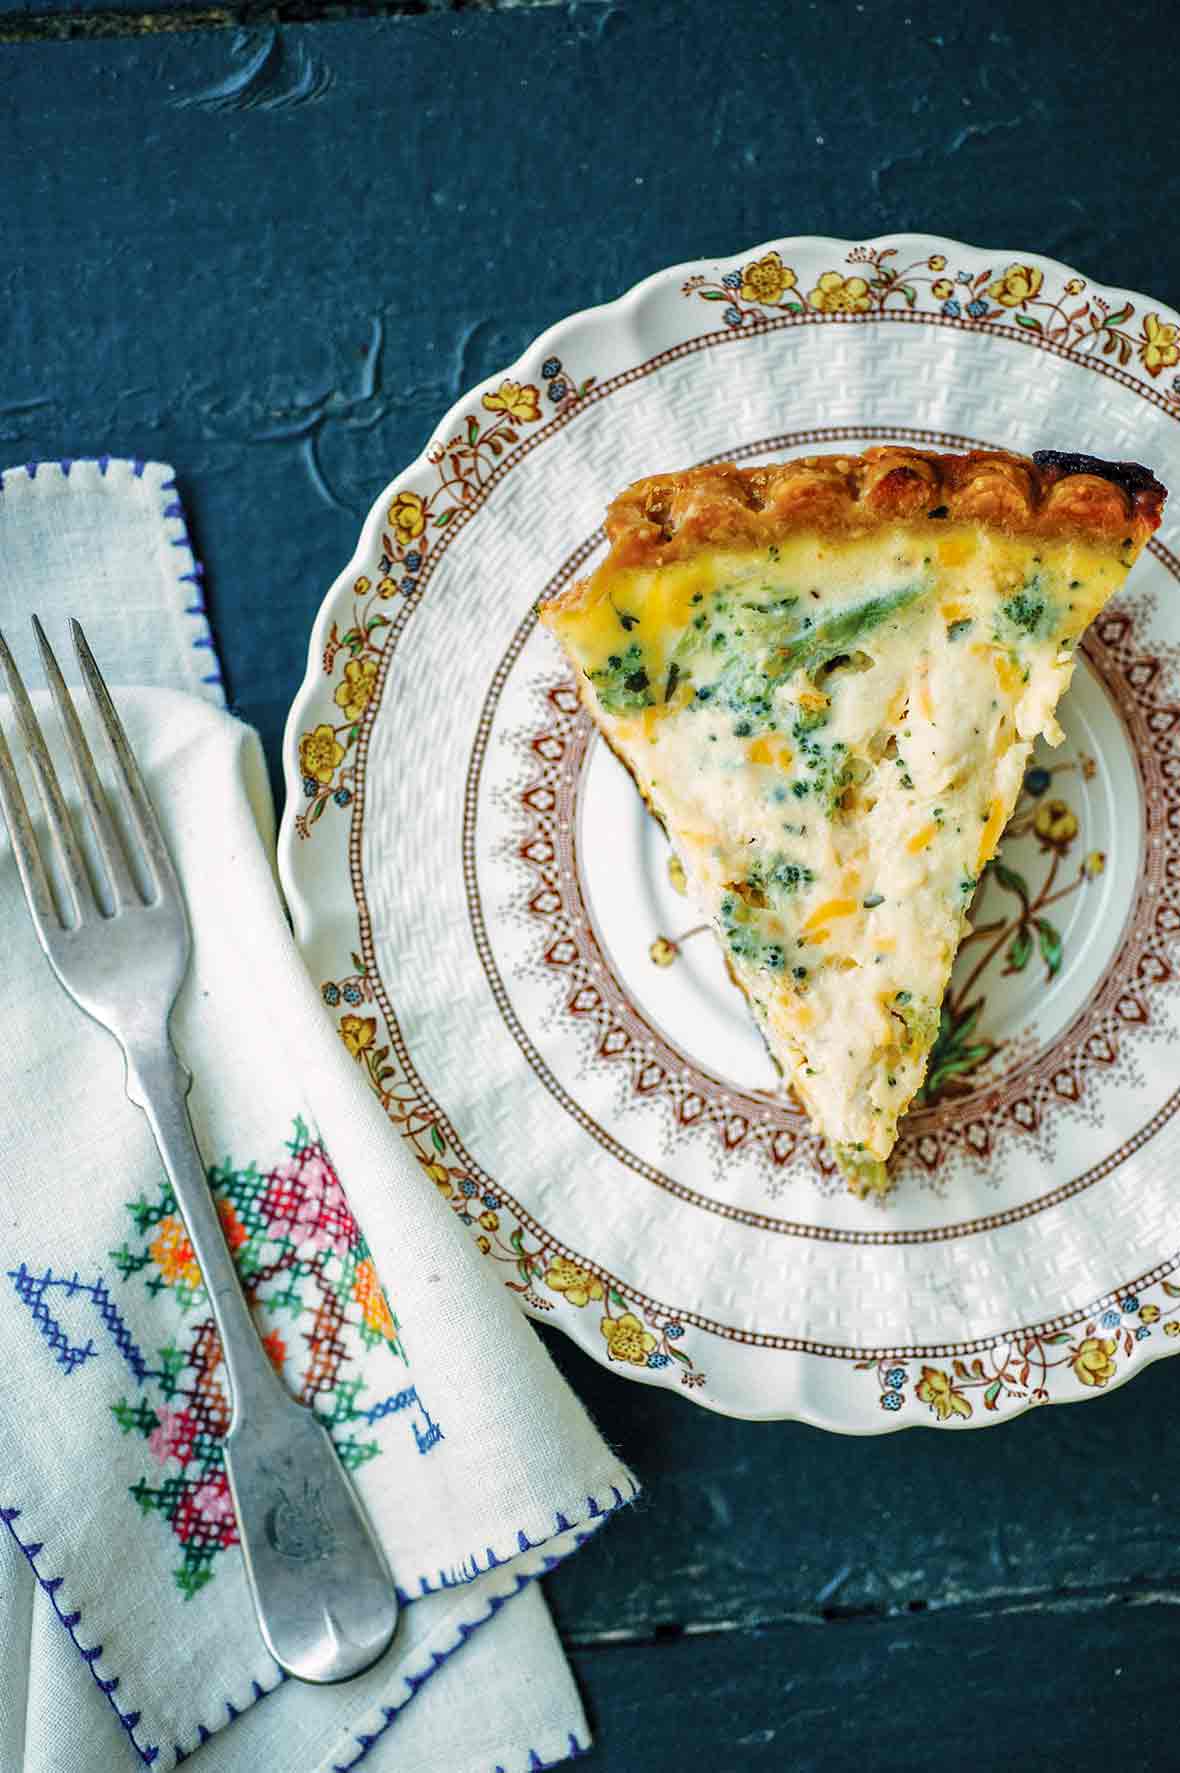 A plate with a slice of broccoli Cheddar quiche